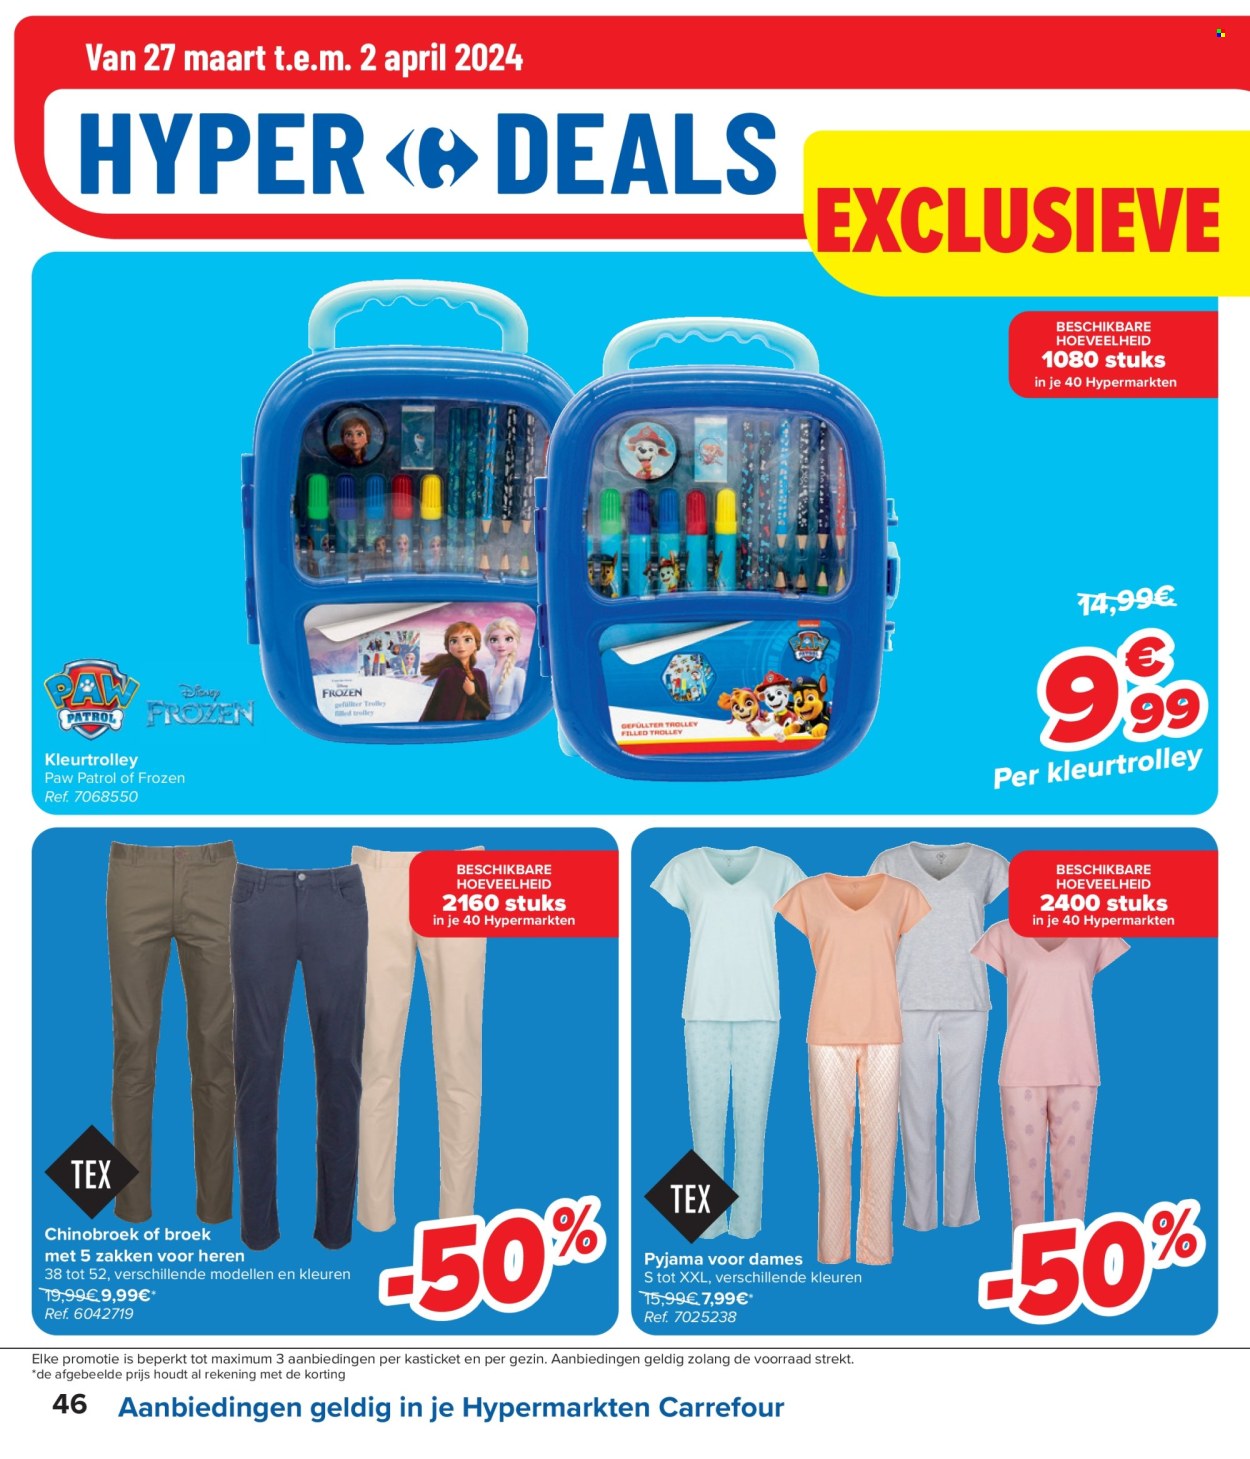 Catalogue Carrefour hypermarkt - 27.3.2024 - 8.4.2024. Page 46.